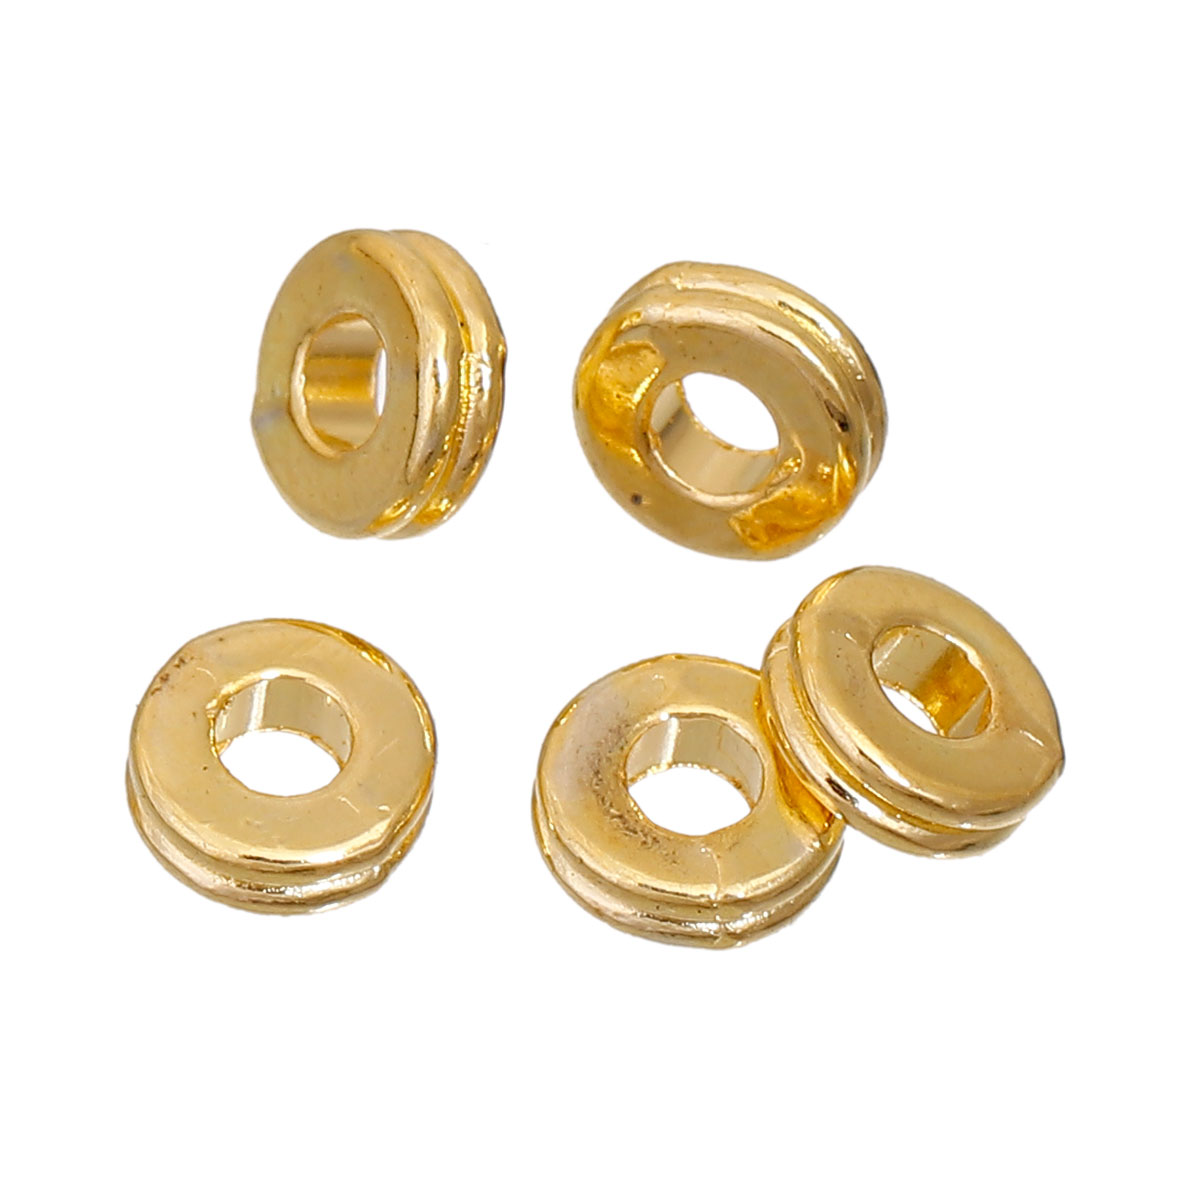 Picture of Zinc Based Alloy Spacer Beads Round Gold Plated Stripe Carved About 6mm Dia, 300 PCs